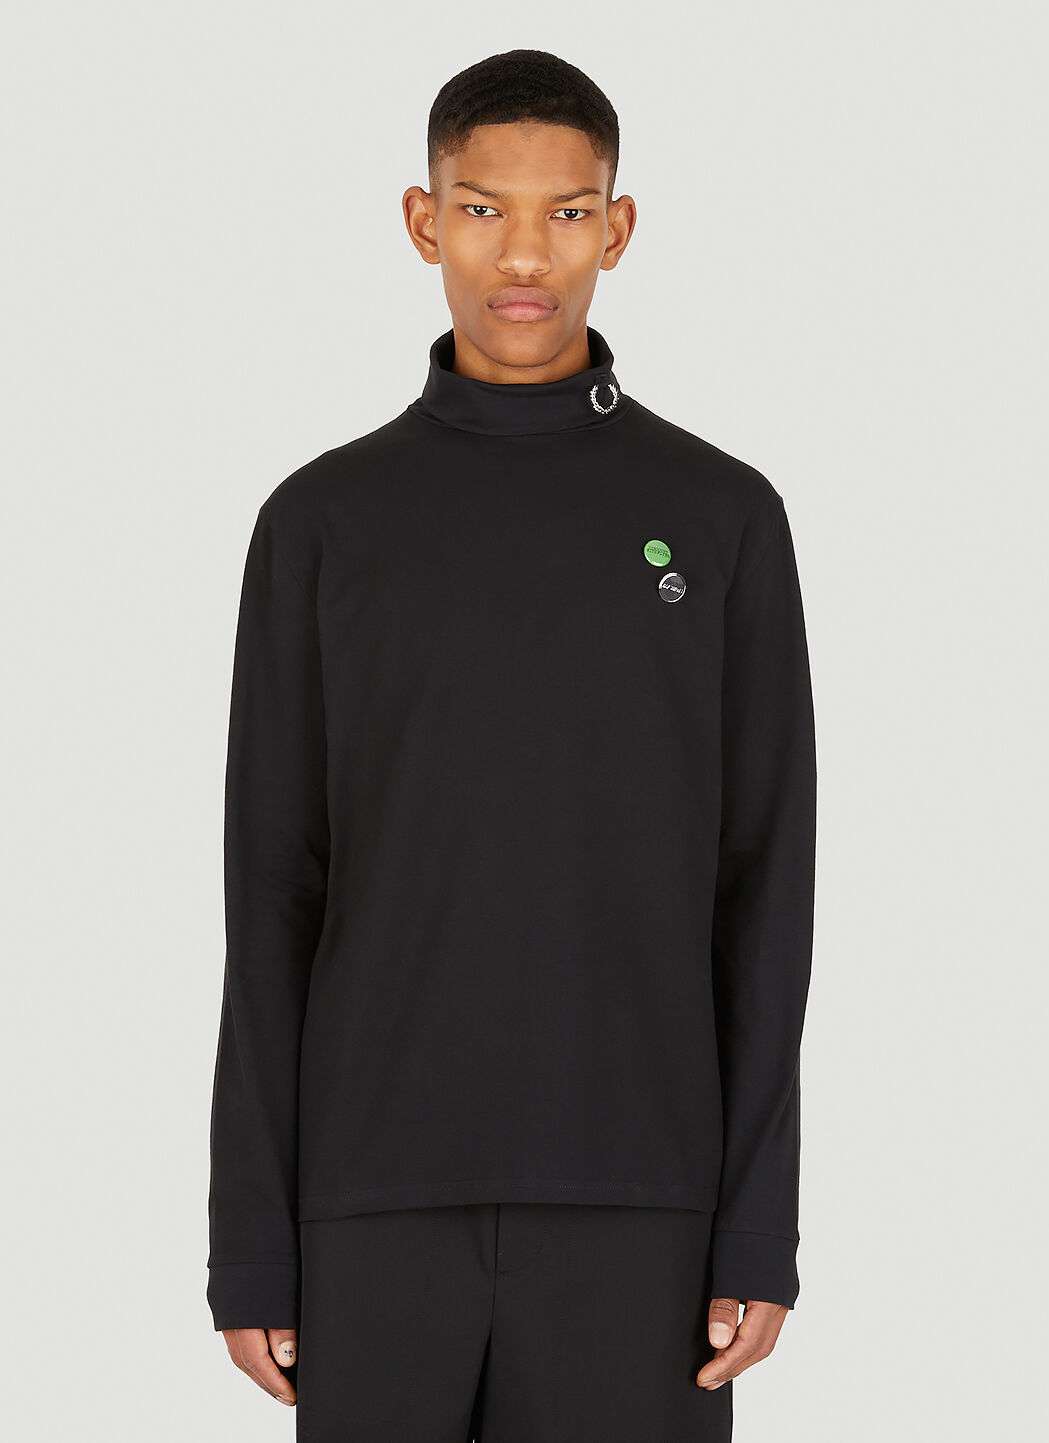 Raf Simons x Fred Perry Laurel Wreath Roll Neck Top in Black | LN-CC®